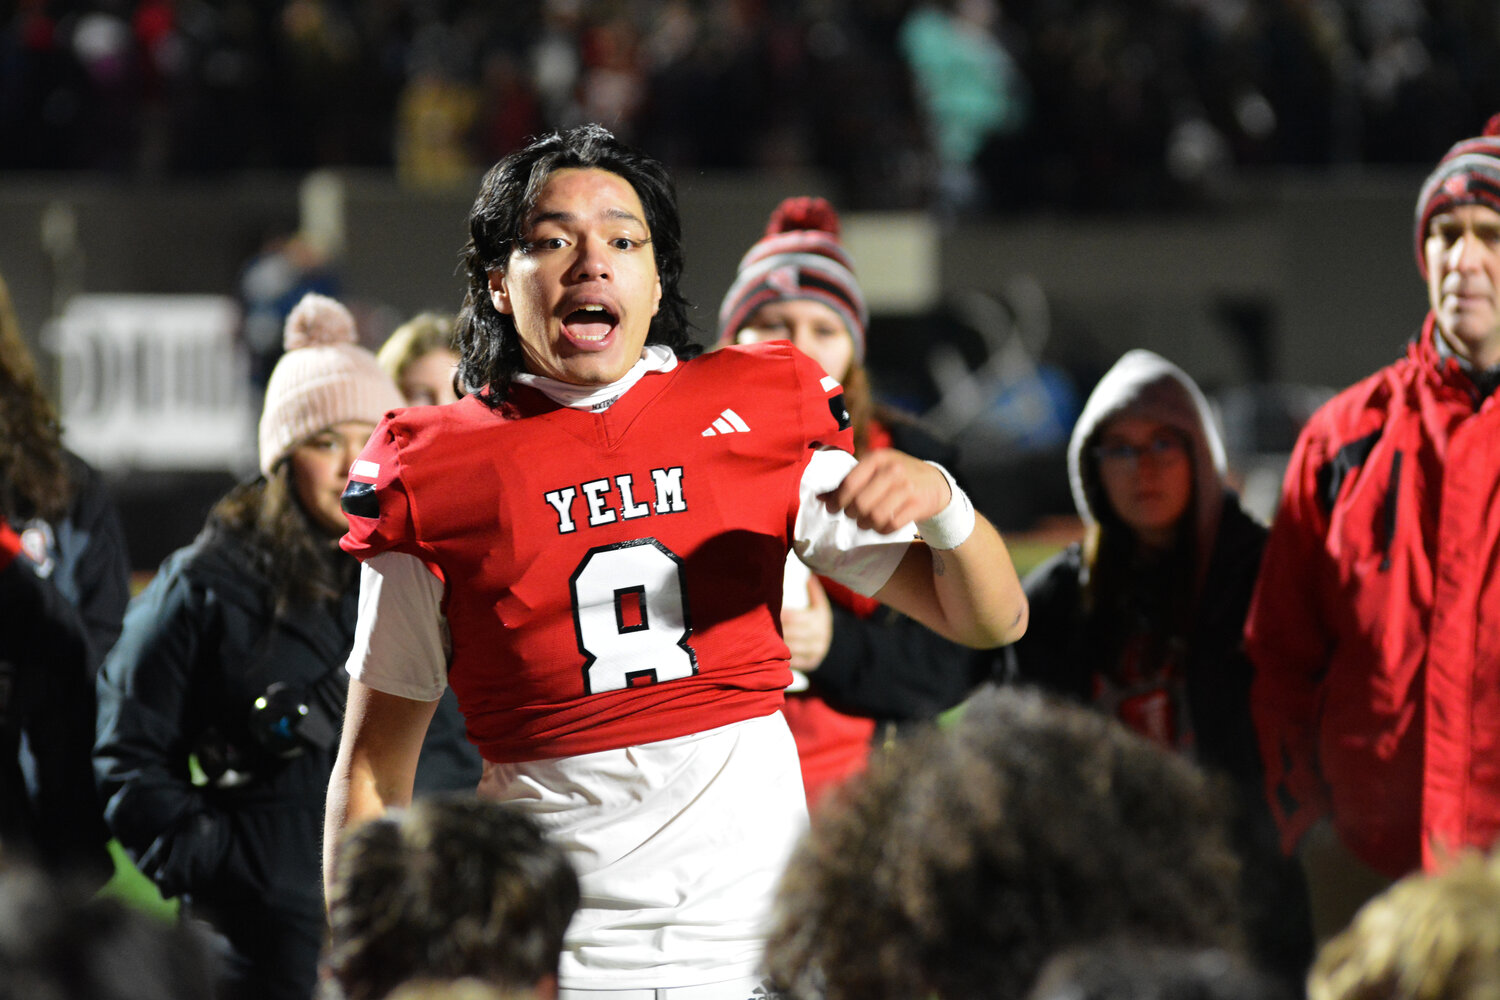 Senior quarterback Damian Aalona delivers a passionate speech to his teammates on Nov. 17 after Yelm defeated Mount Tahoma, 29-12, in the 3A state quarterfinals.